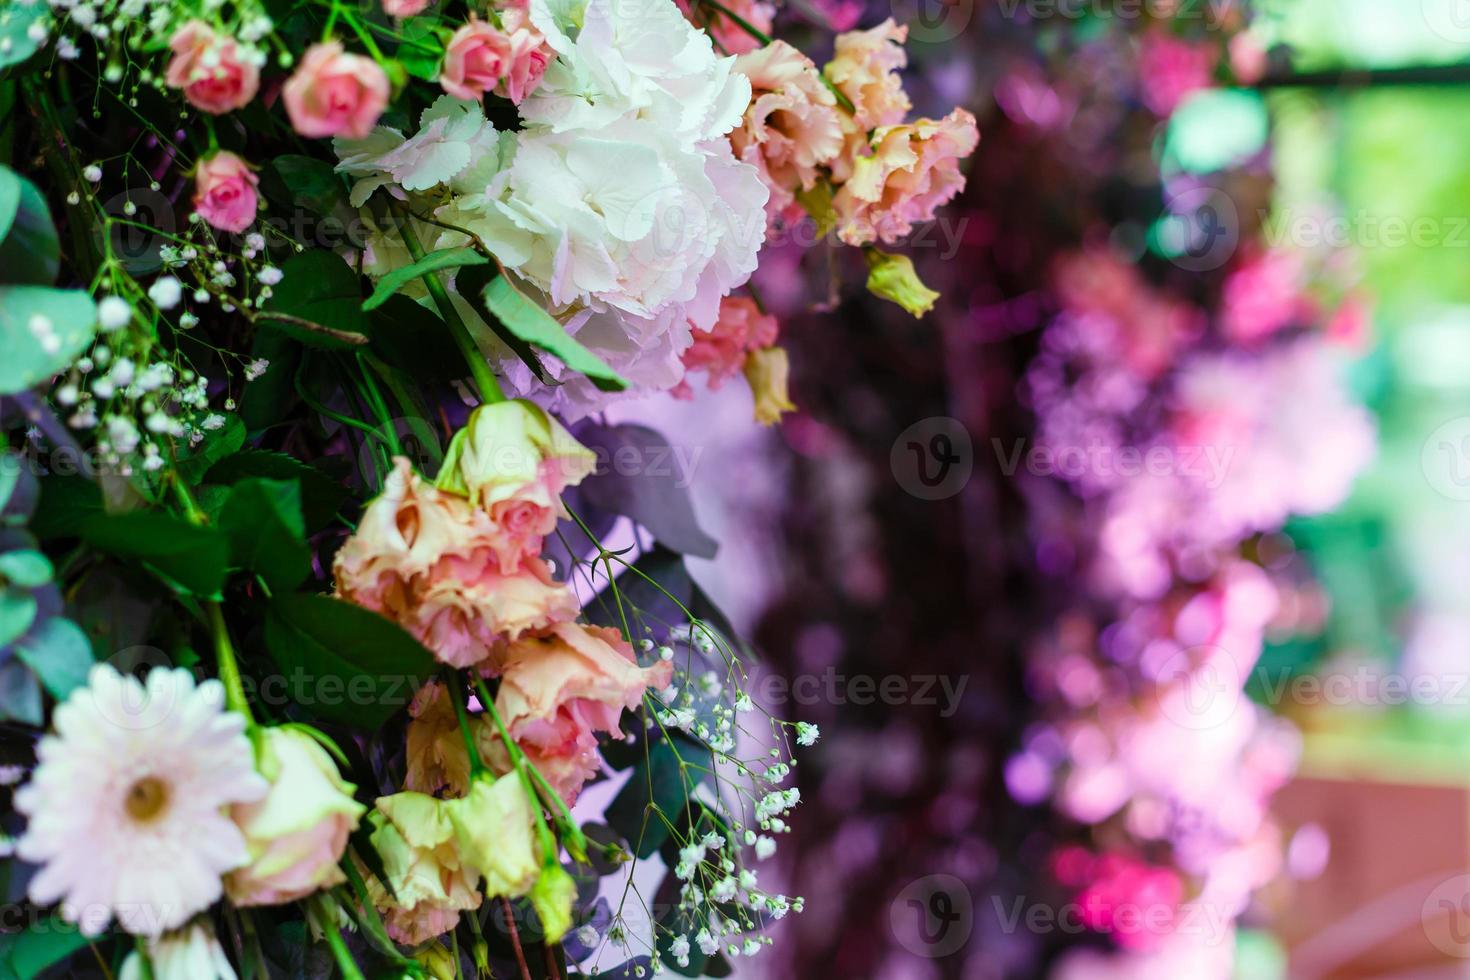 archway of many beautiful flowers, wedding arch with peonies Flowers for a wedding arch photo